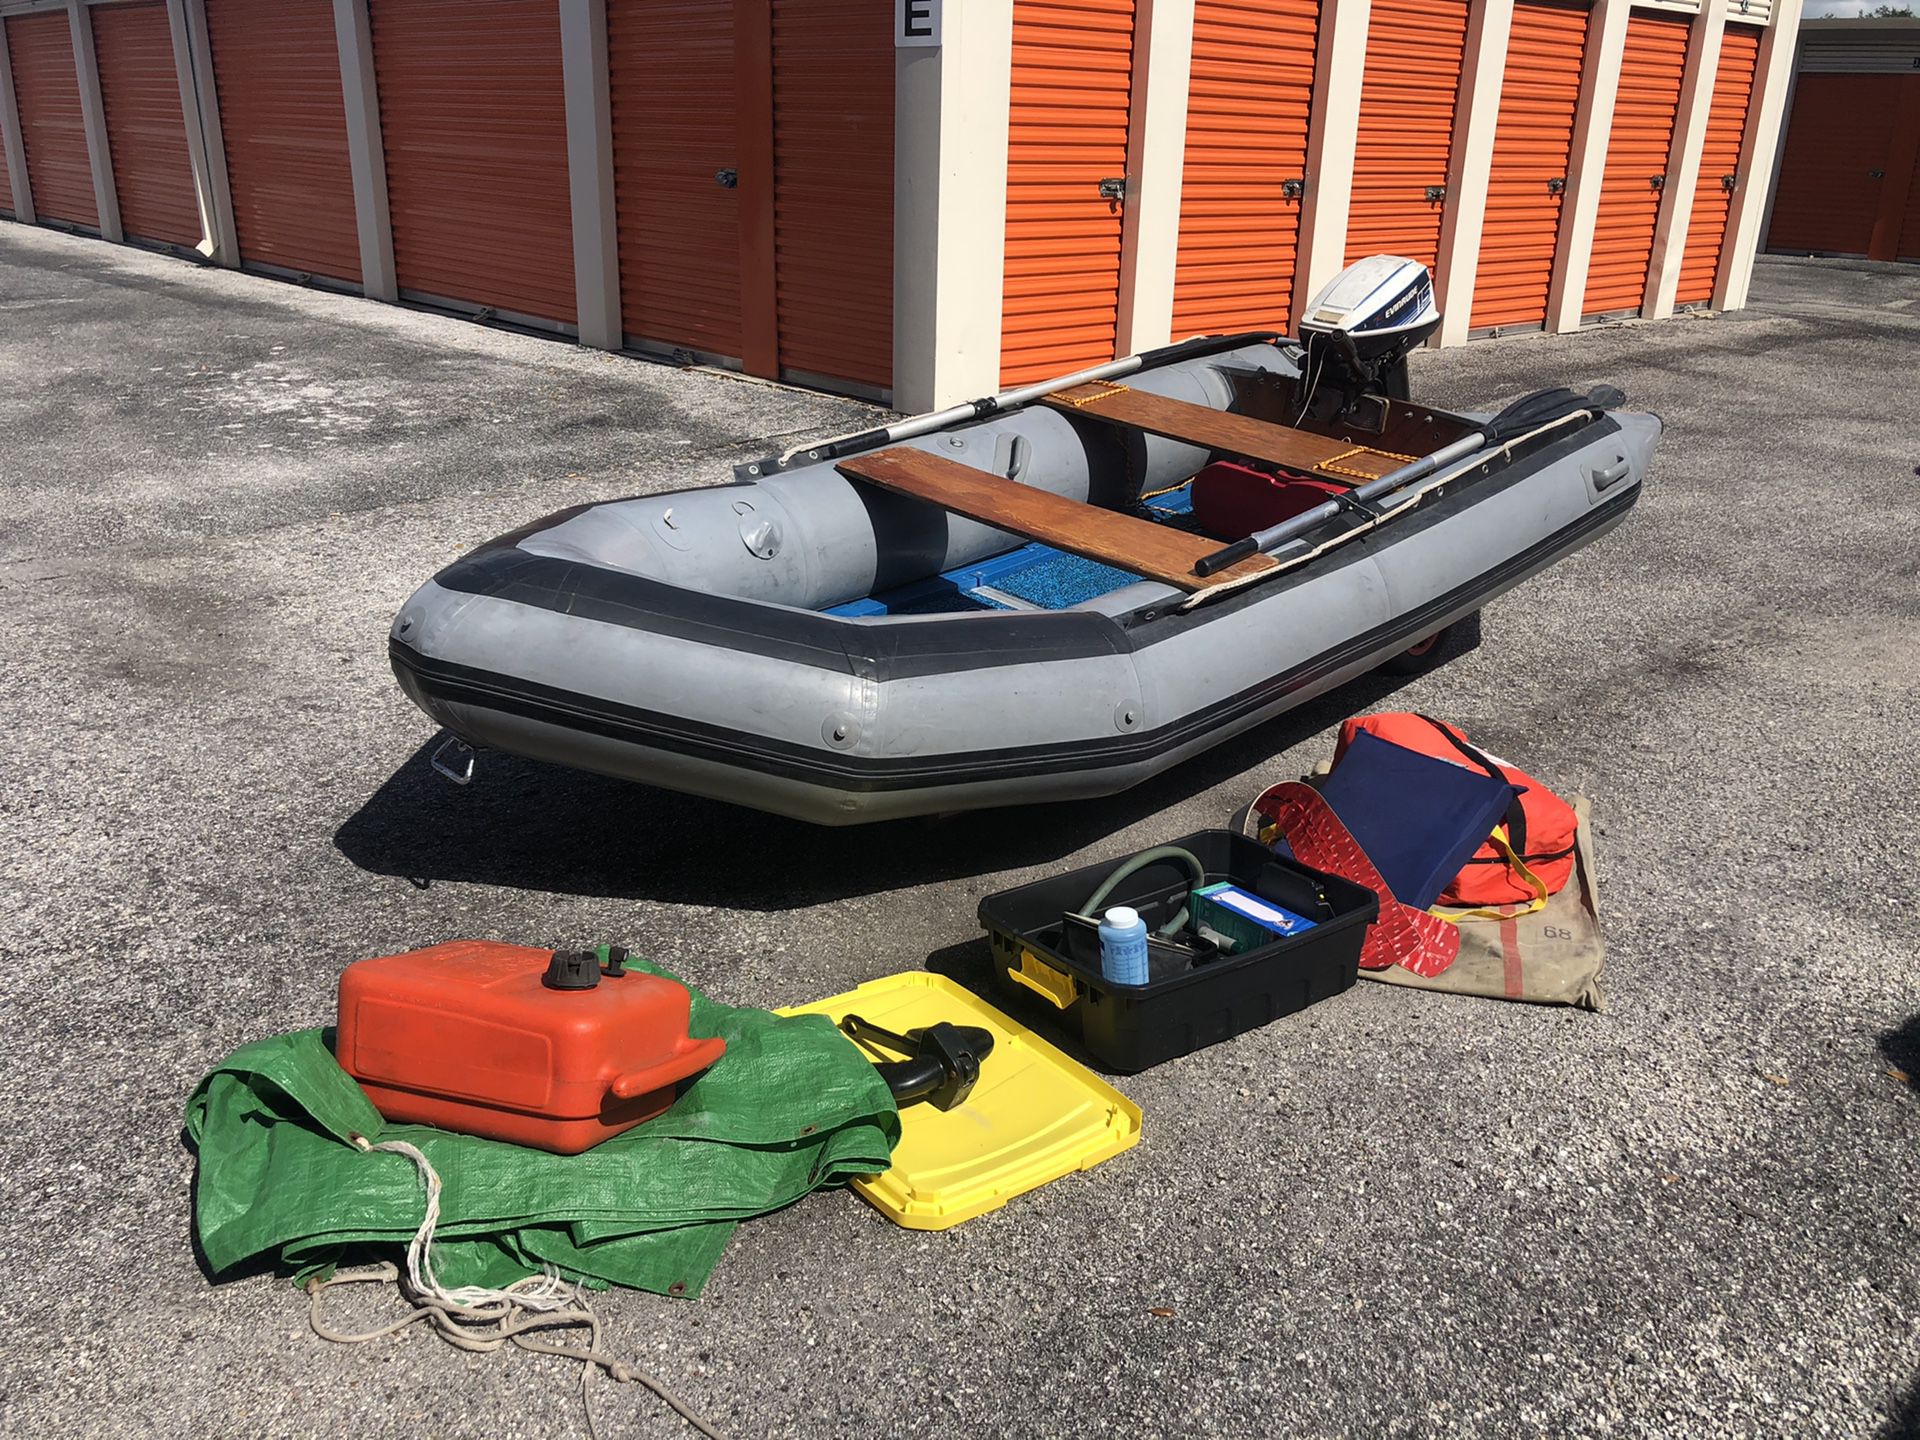 12’ Achilles Dinghy Boat With 15hp Evinrude Motor